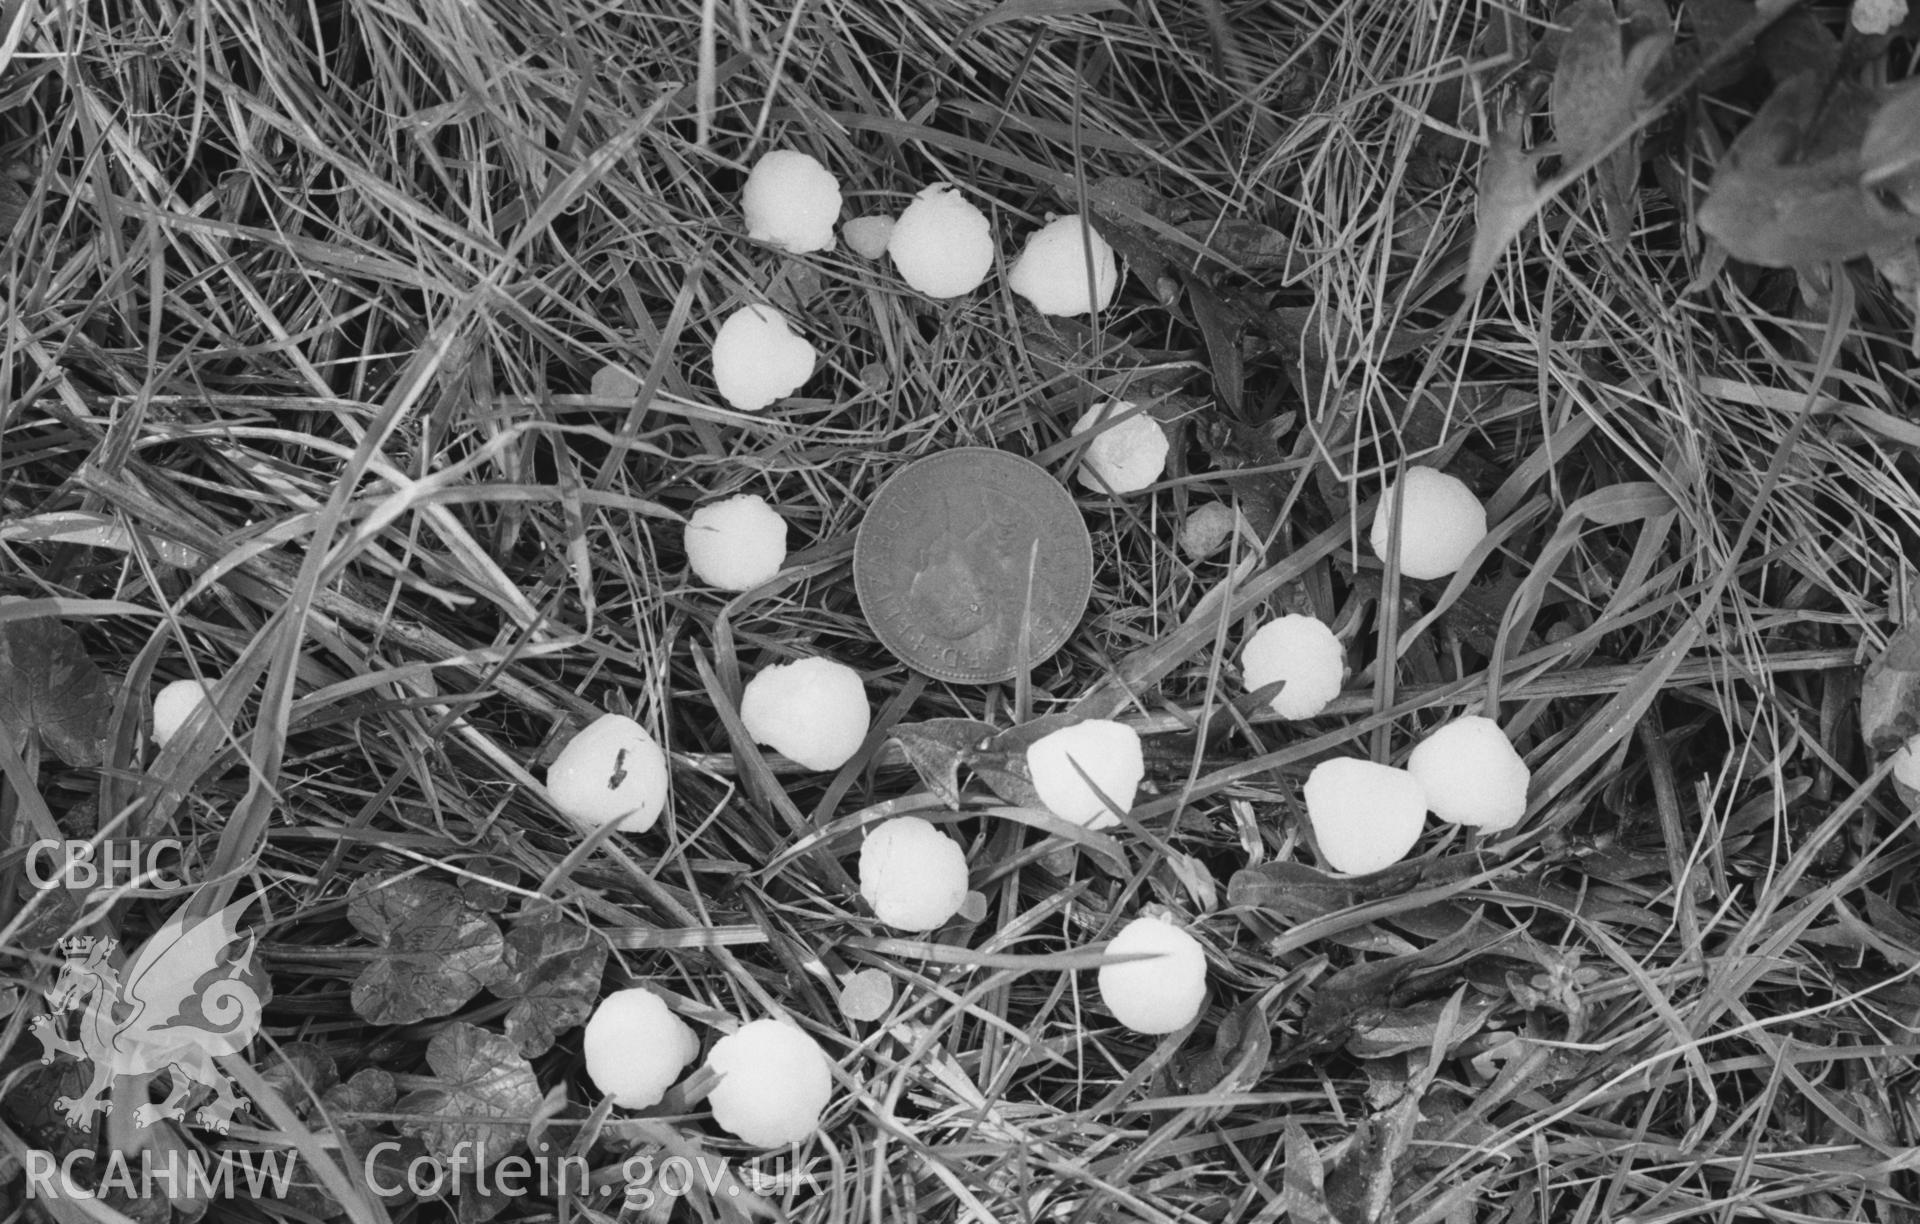 Digital copy of a black and white negative showing large hailstones (with old penny for scale) that fell at c.4:30 pm on the grass by Llanychaiarn bridge. Photographed by Arthur O. Chater on 3rd April 1968 at Grid Reference SN 589 788.